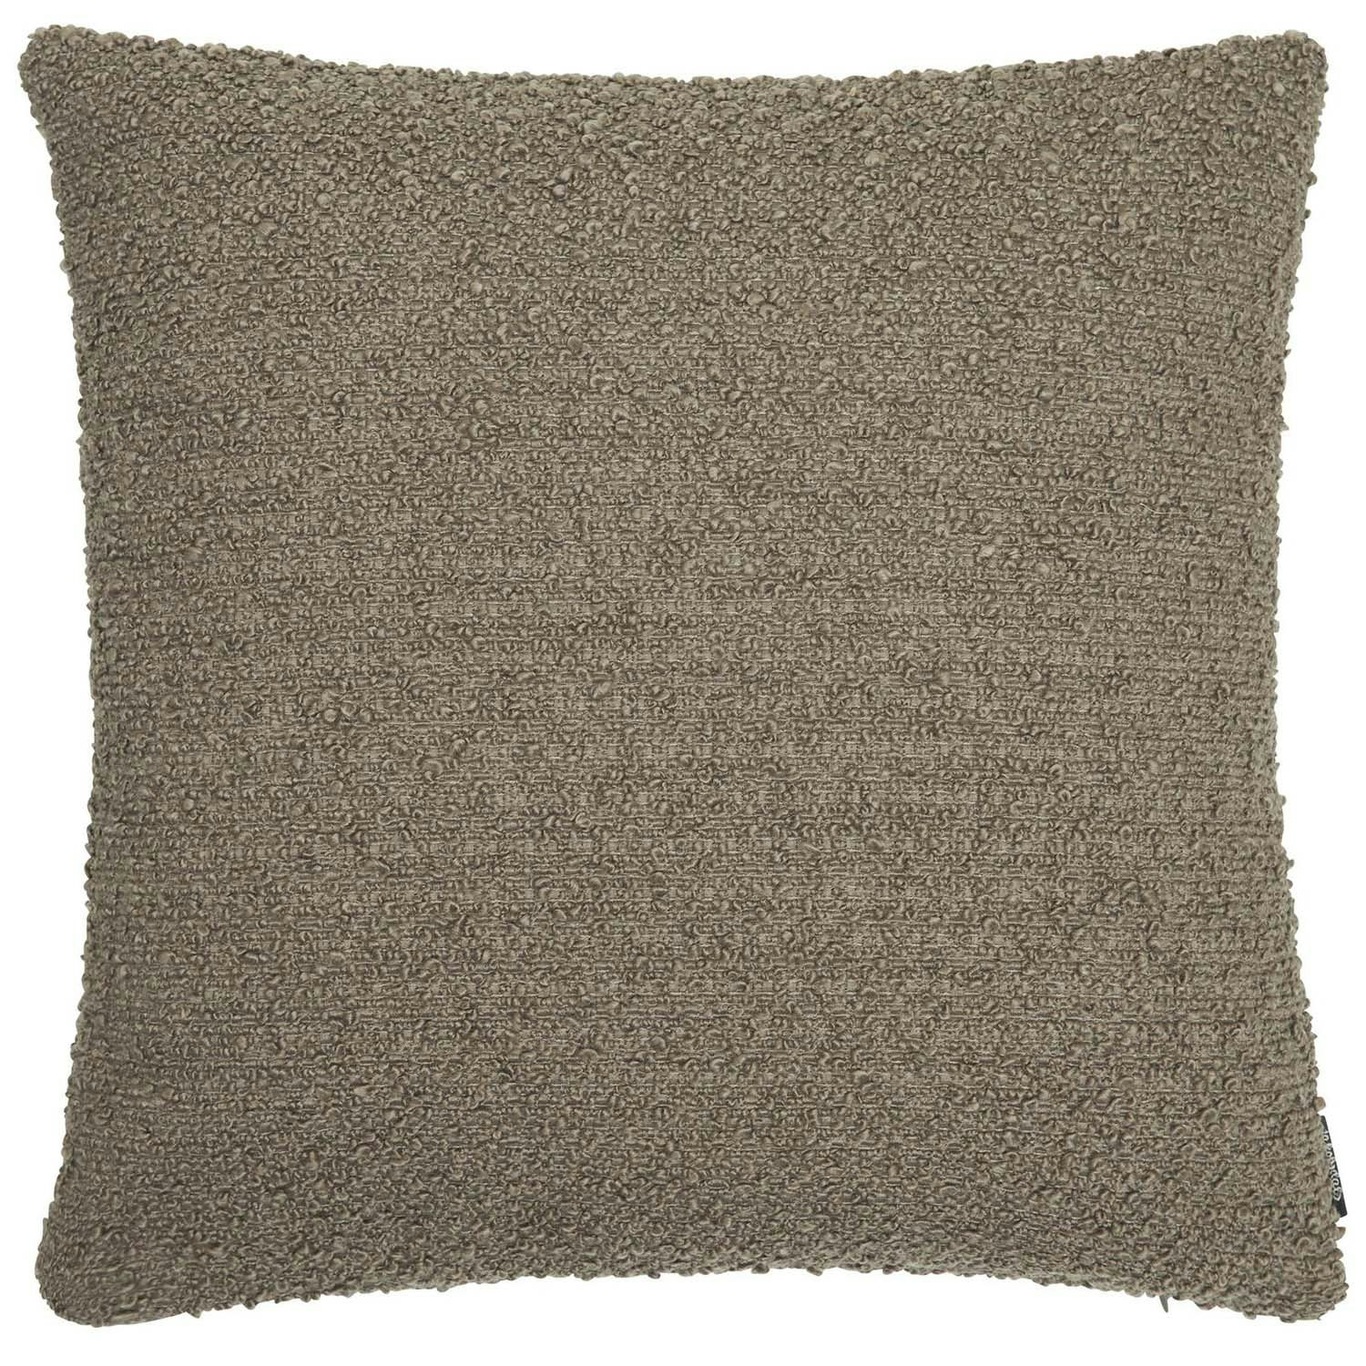 Boucle moment Cushion Cover 45X45 cm, Light Brown